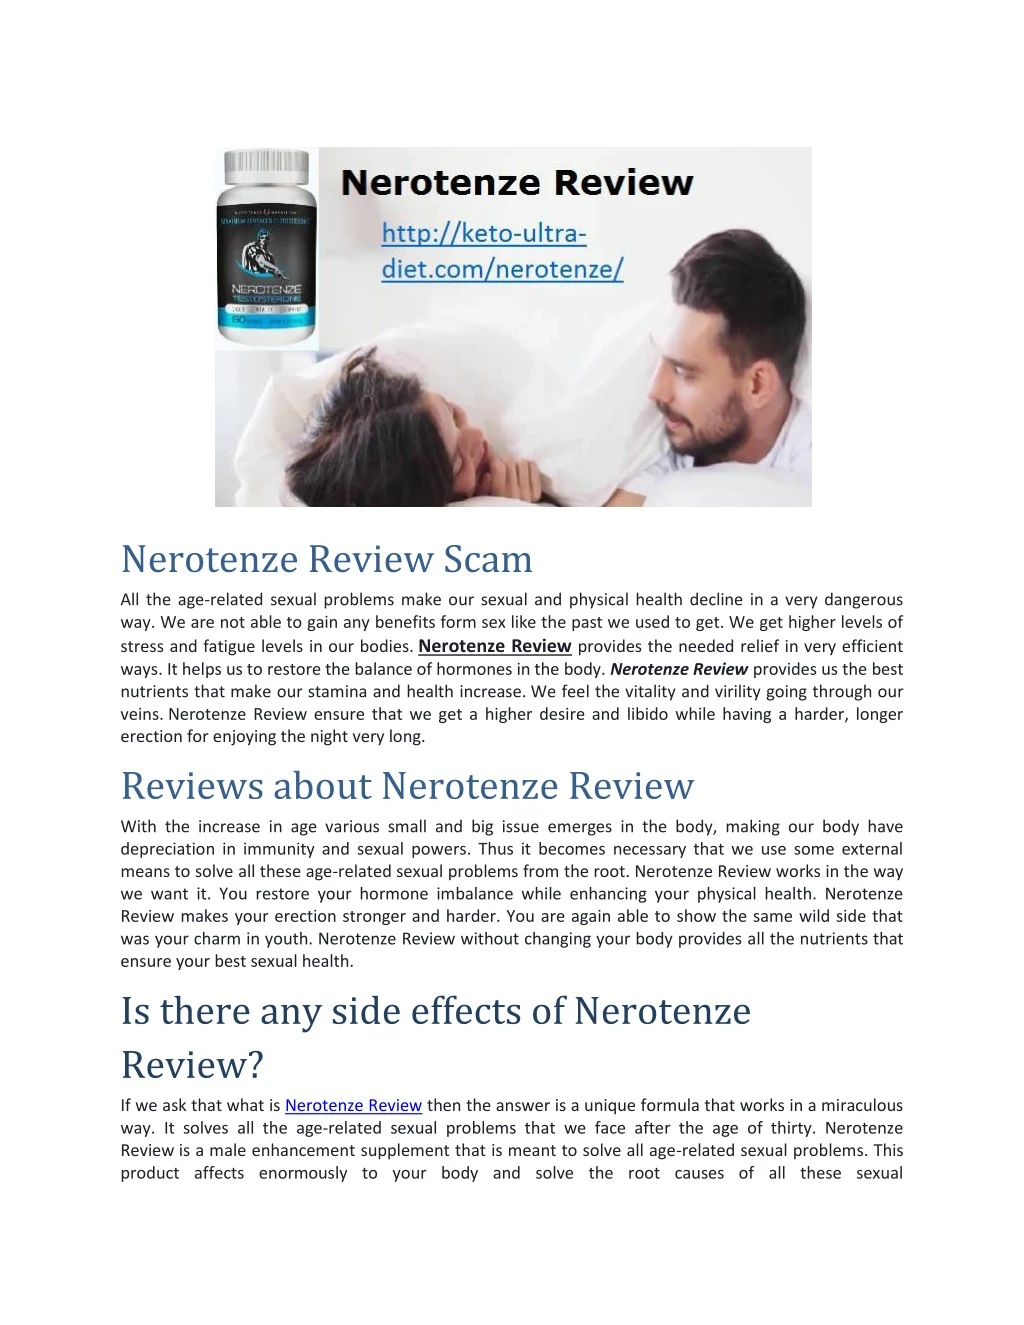 nerotenze review scam